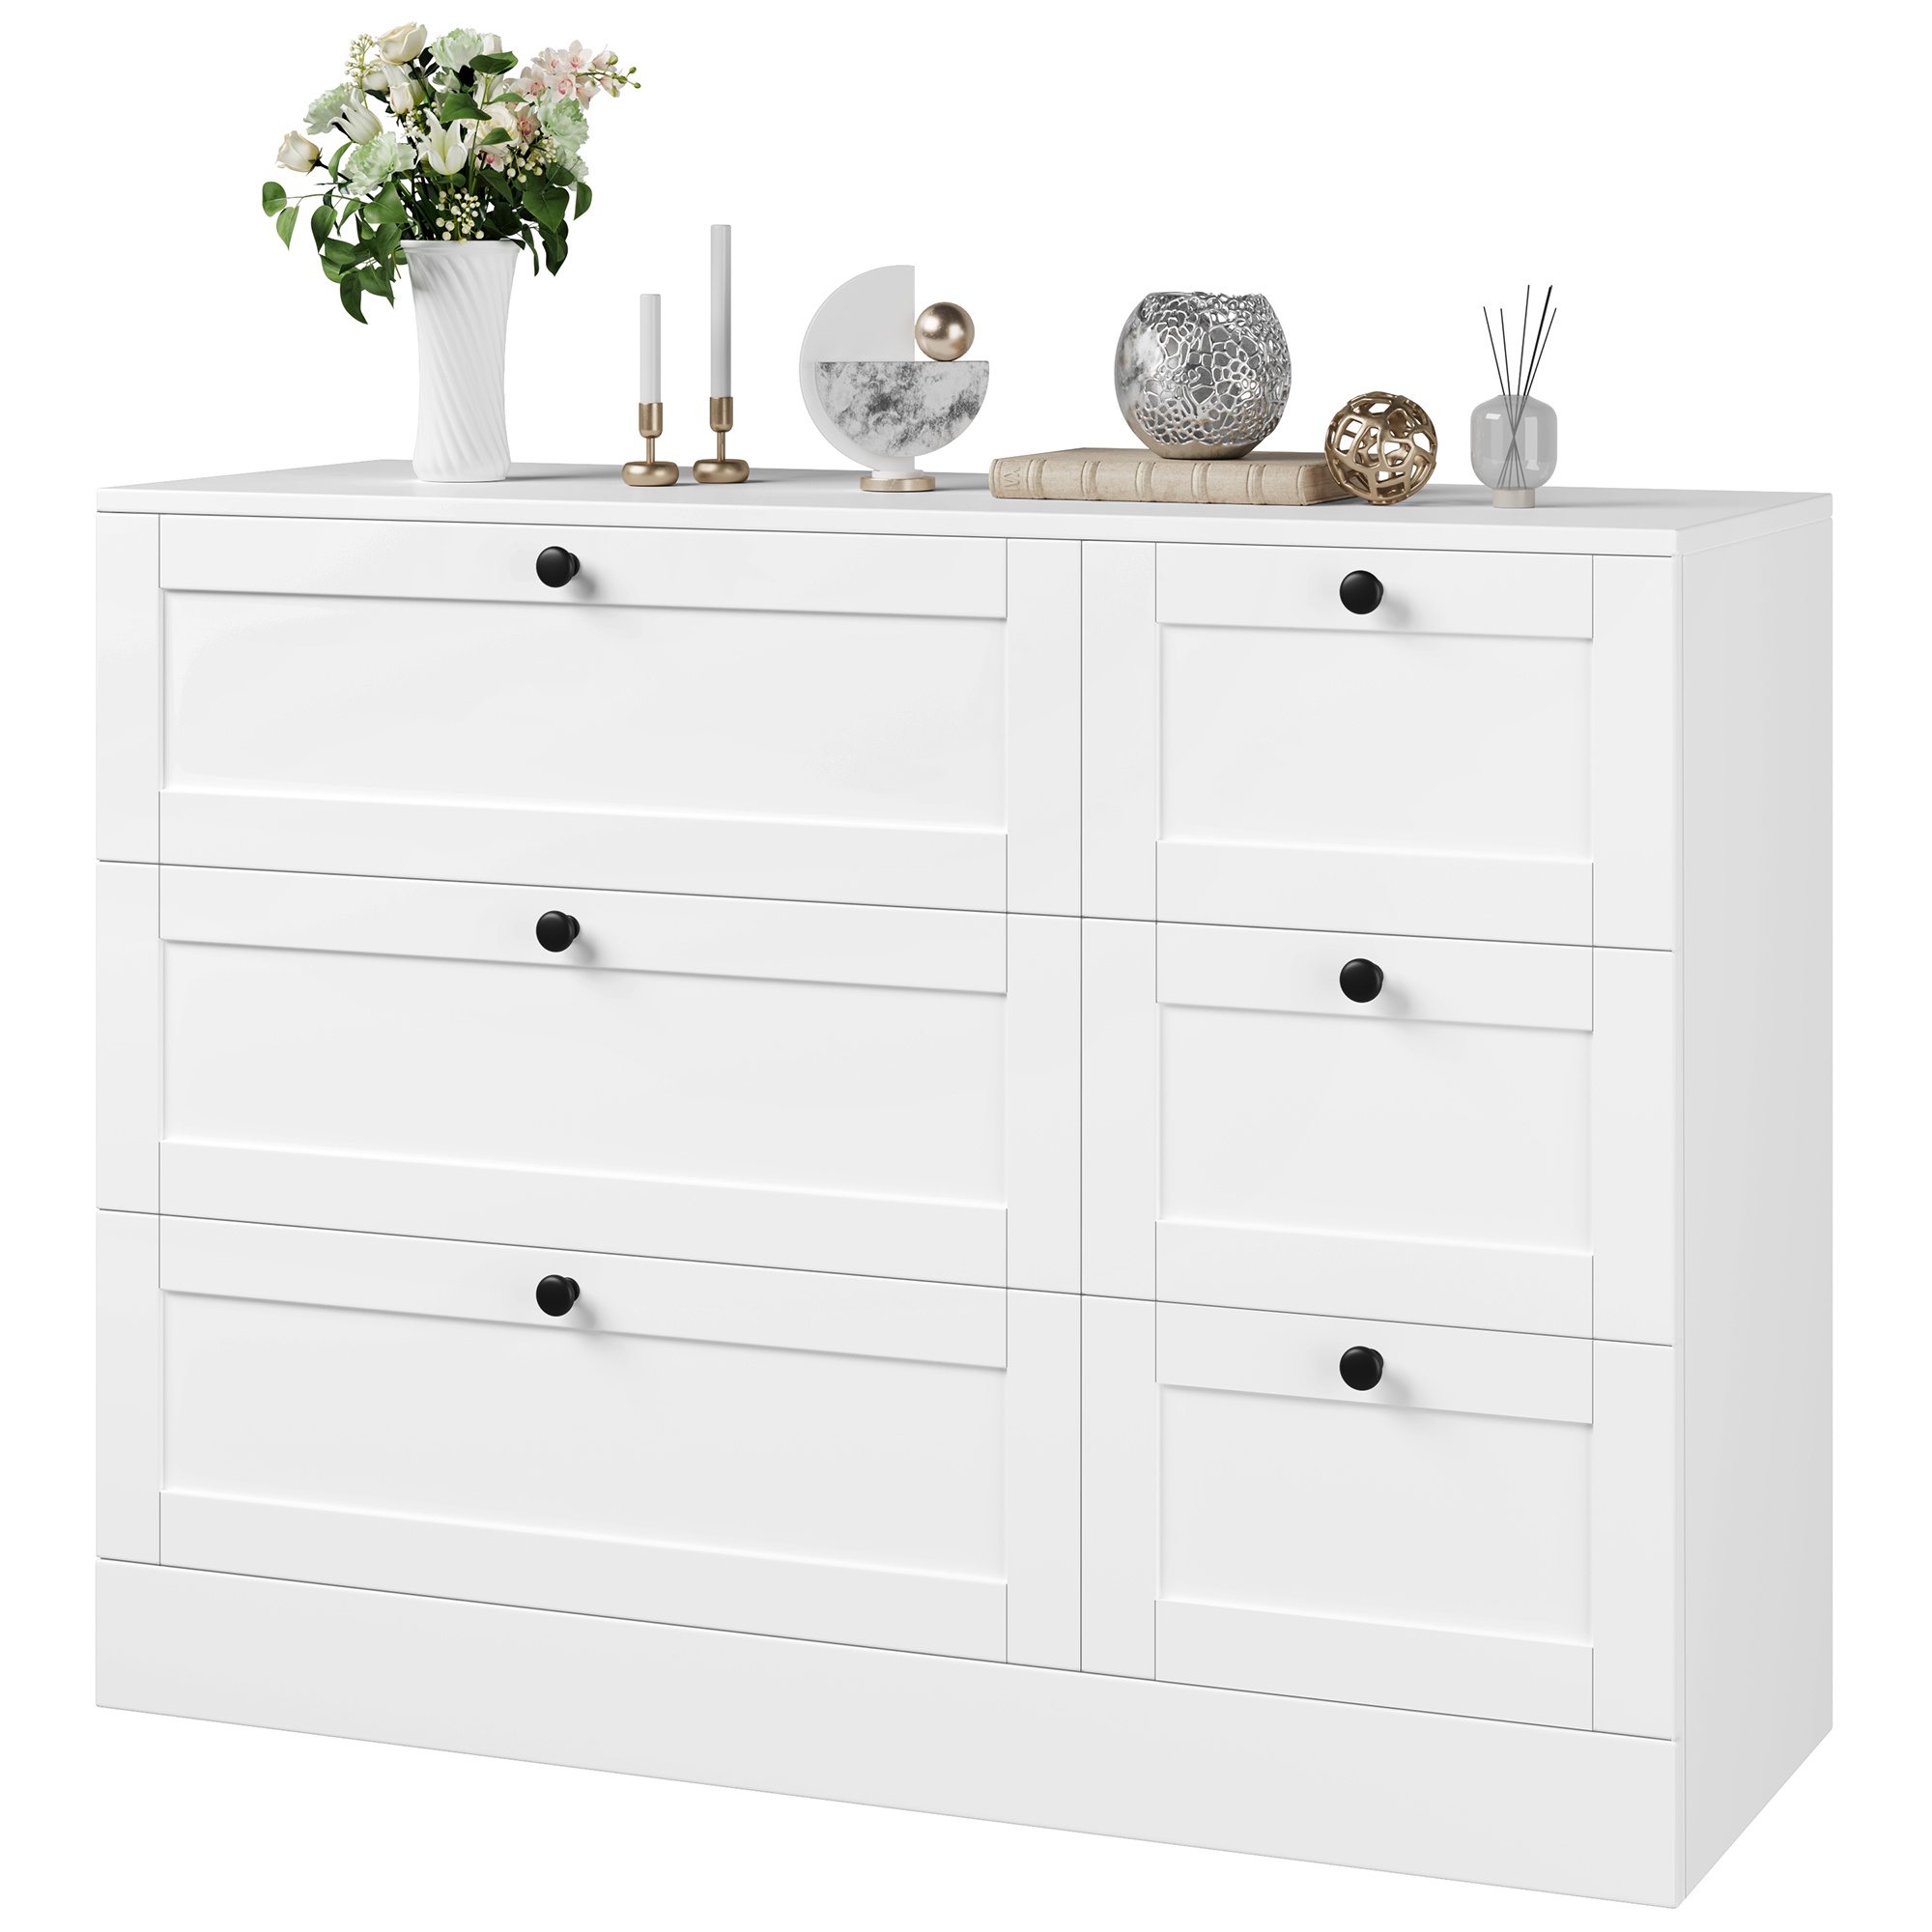 Homfa 6 Drawer White Double Dresser, Wood Storage Cabinet Chest of Drawers for Bedroom Living Room - image 1 of 7